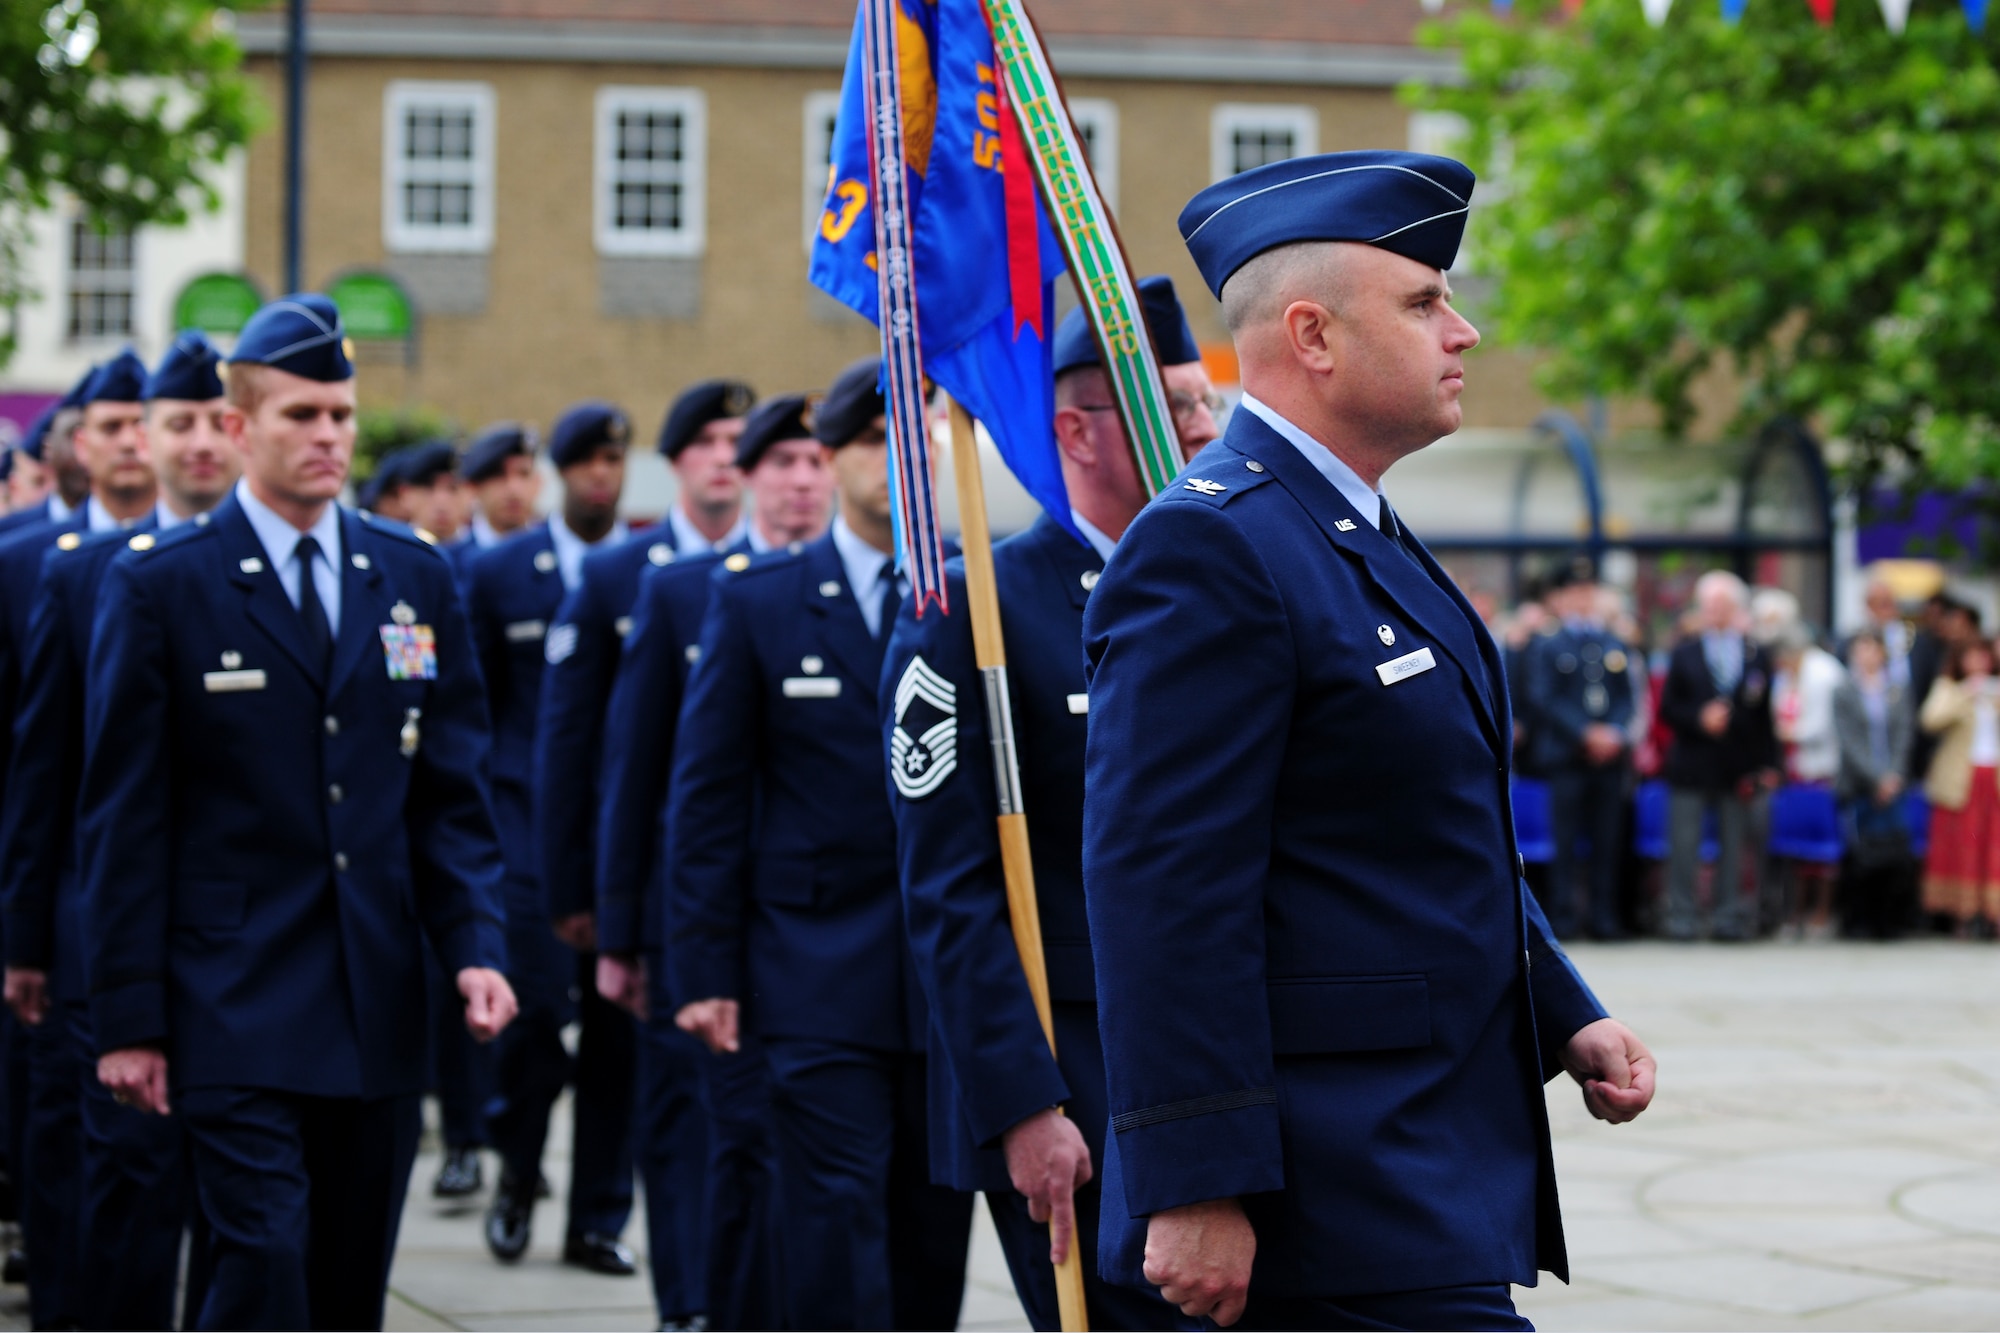 U.S. Air Force Col. Steven Sweeney, 423rd Air Base Group commander, leads a flight of Airmen during the Freedom of the Town and Armed Forces Day at St. Neots, United Kingdom, July 5, 2014. The festival marked the first time the city presented the freedom of the town scroll to American Armed Forces. (U.S. Air Force photo by Staff Sgt. Jarad A. Denton/Released)